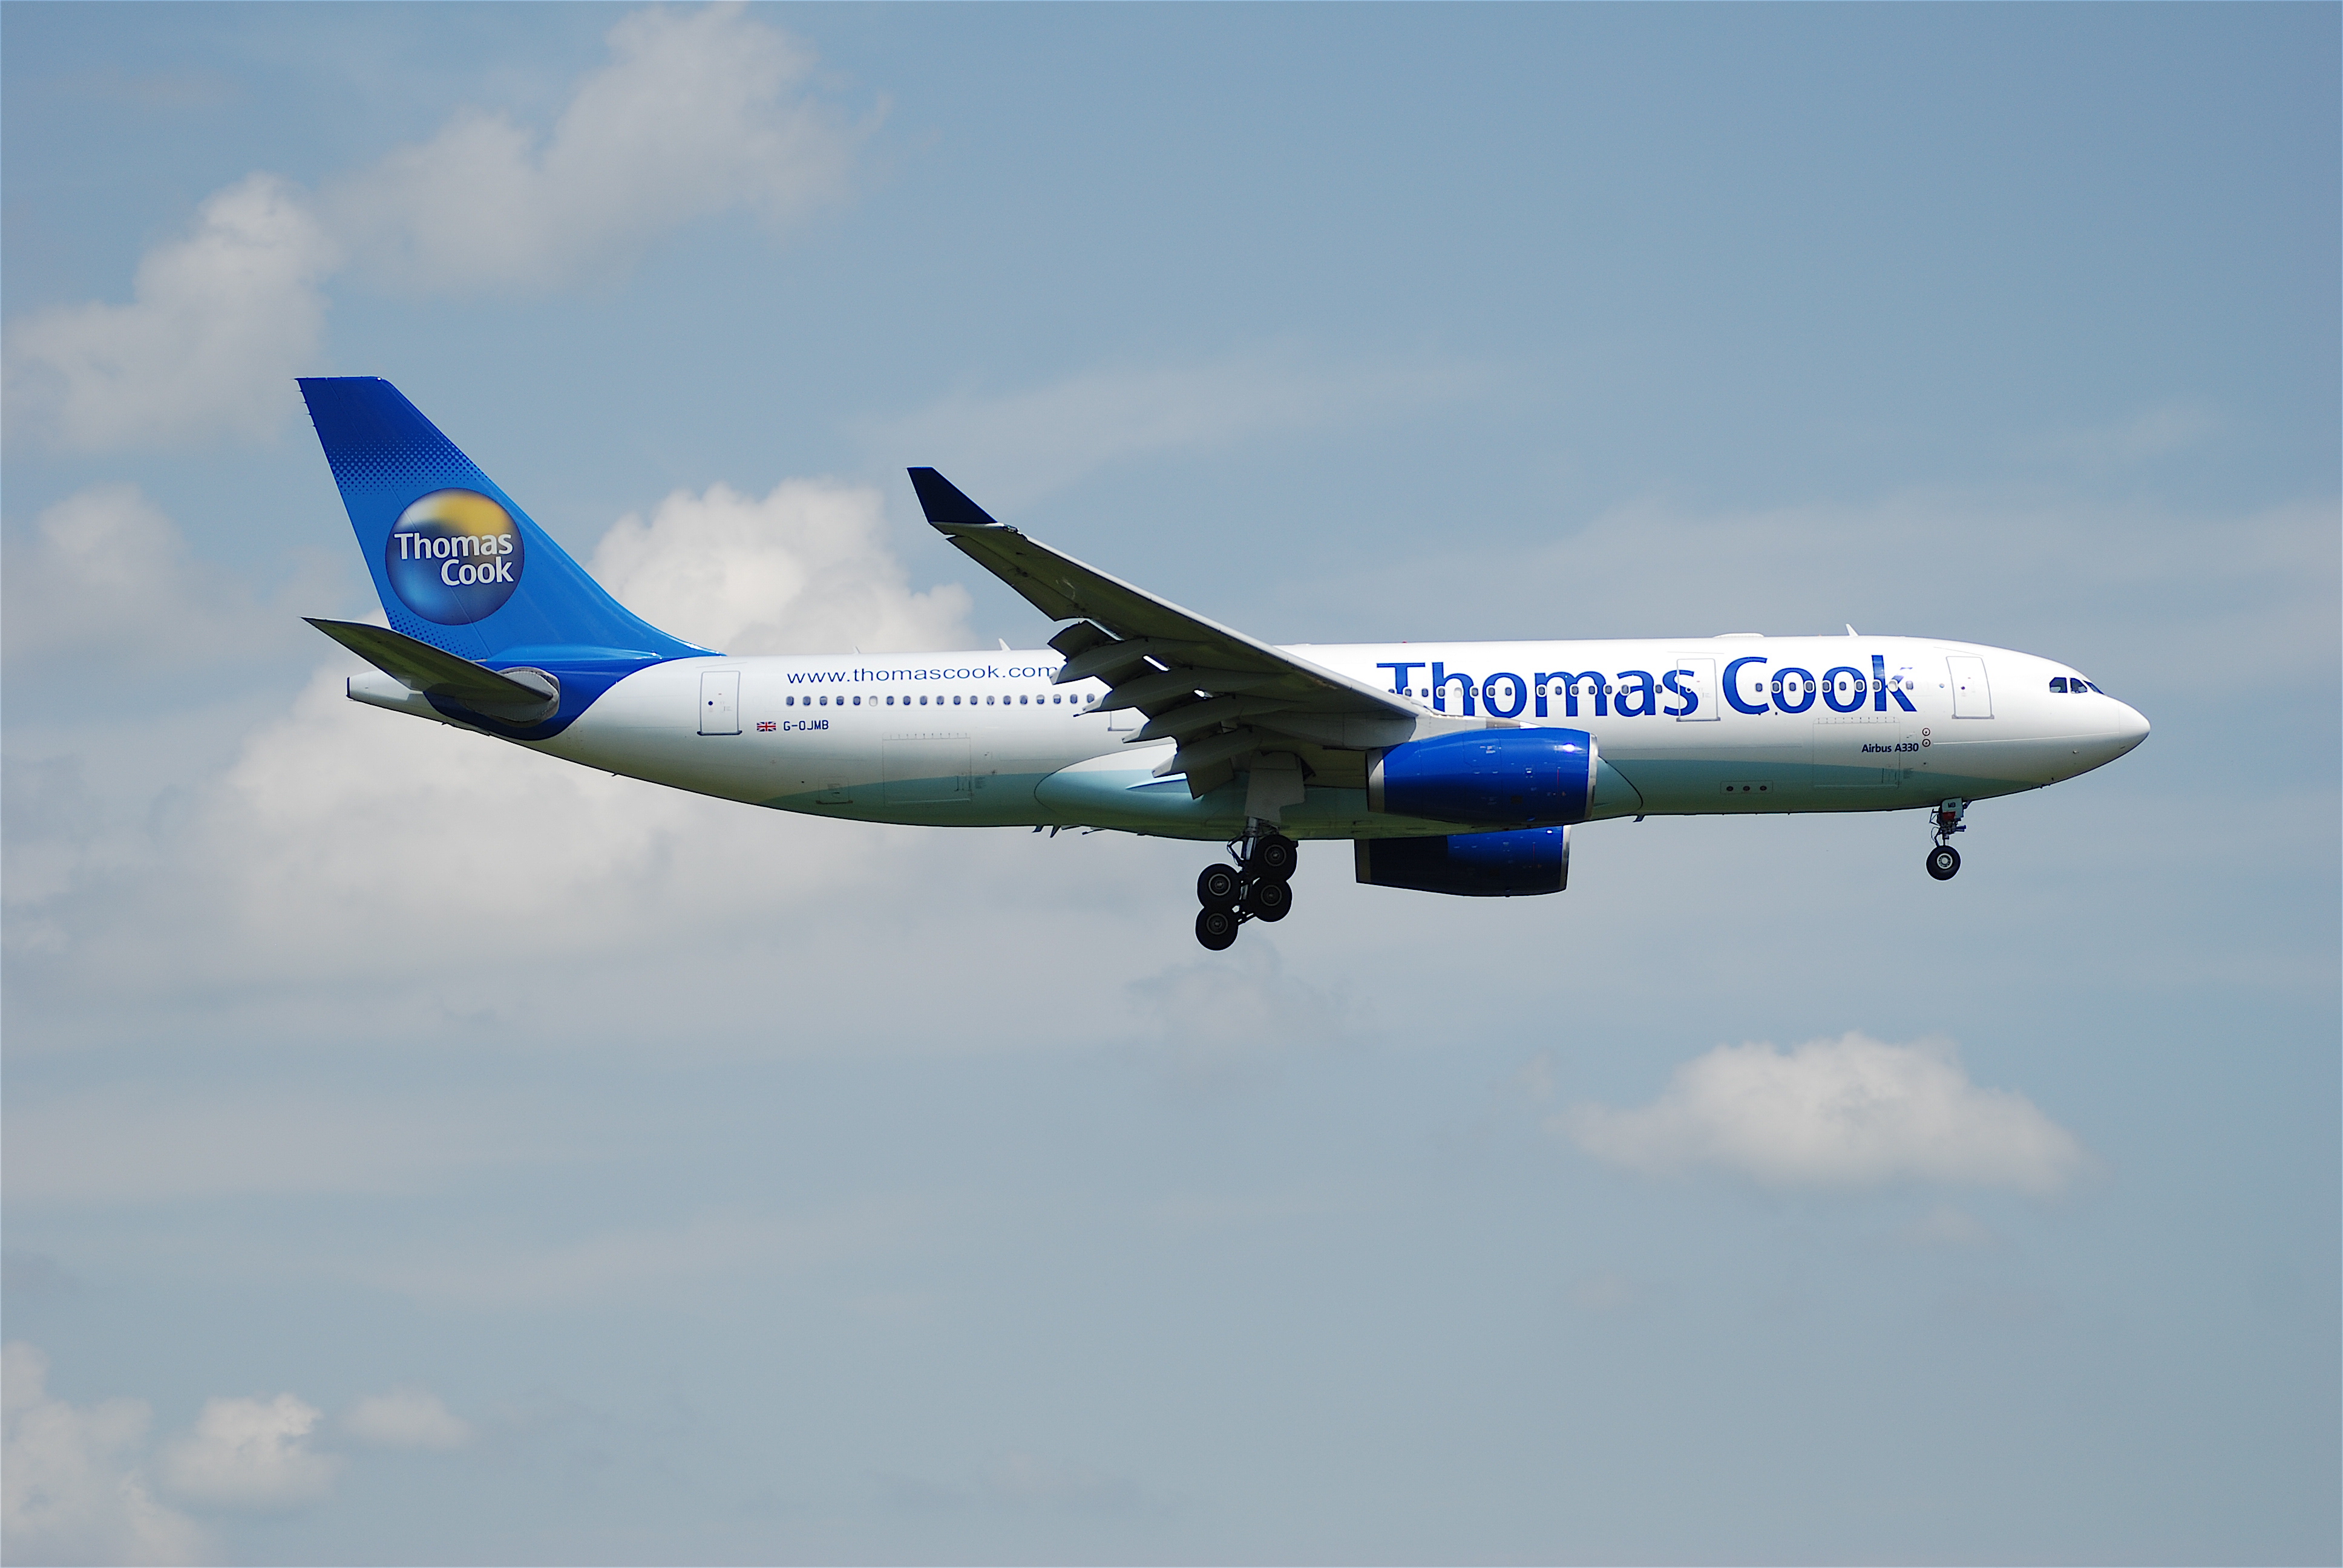 Thomas Cook Airlines Airbus A330-243; G-OJMB@ZRH;22.05.2007 469al (4290887295)